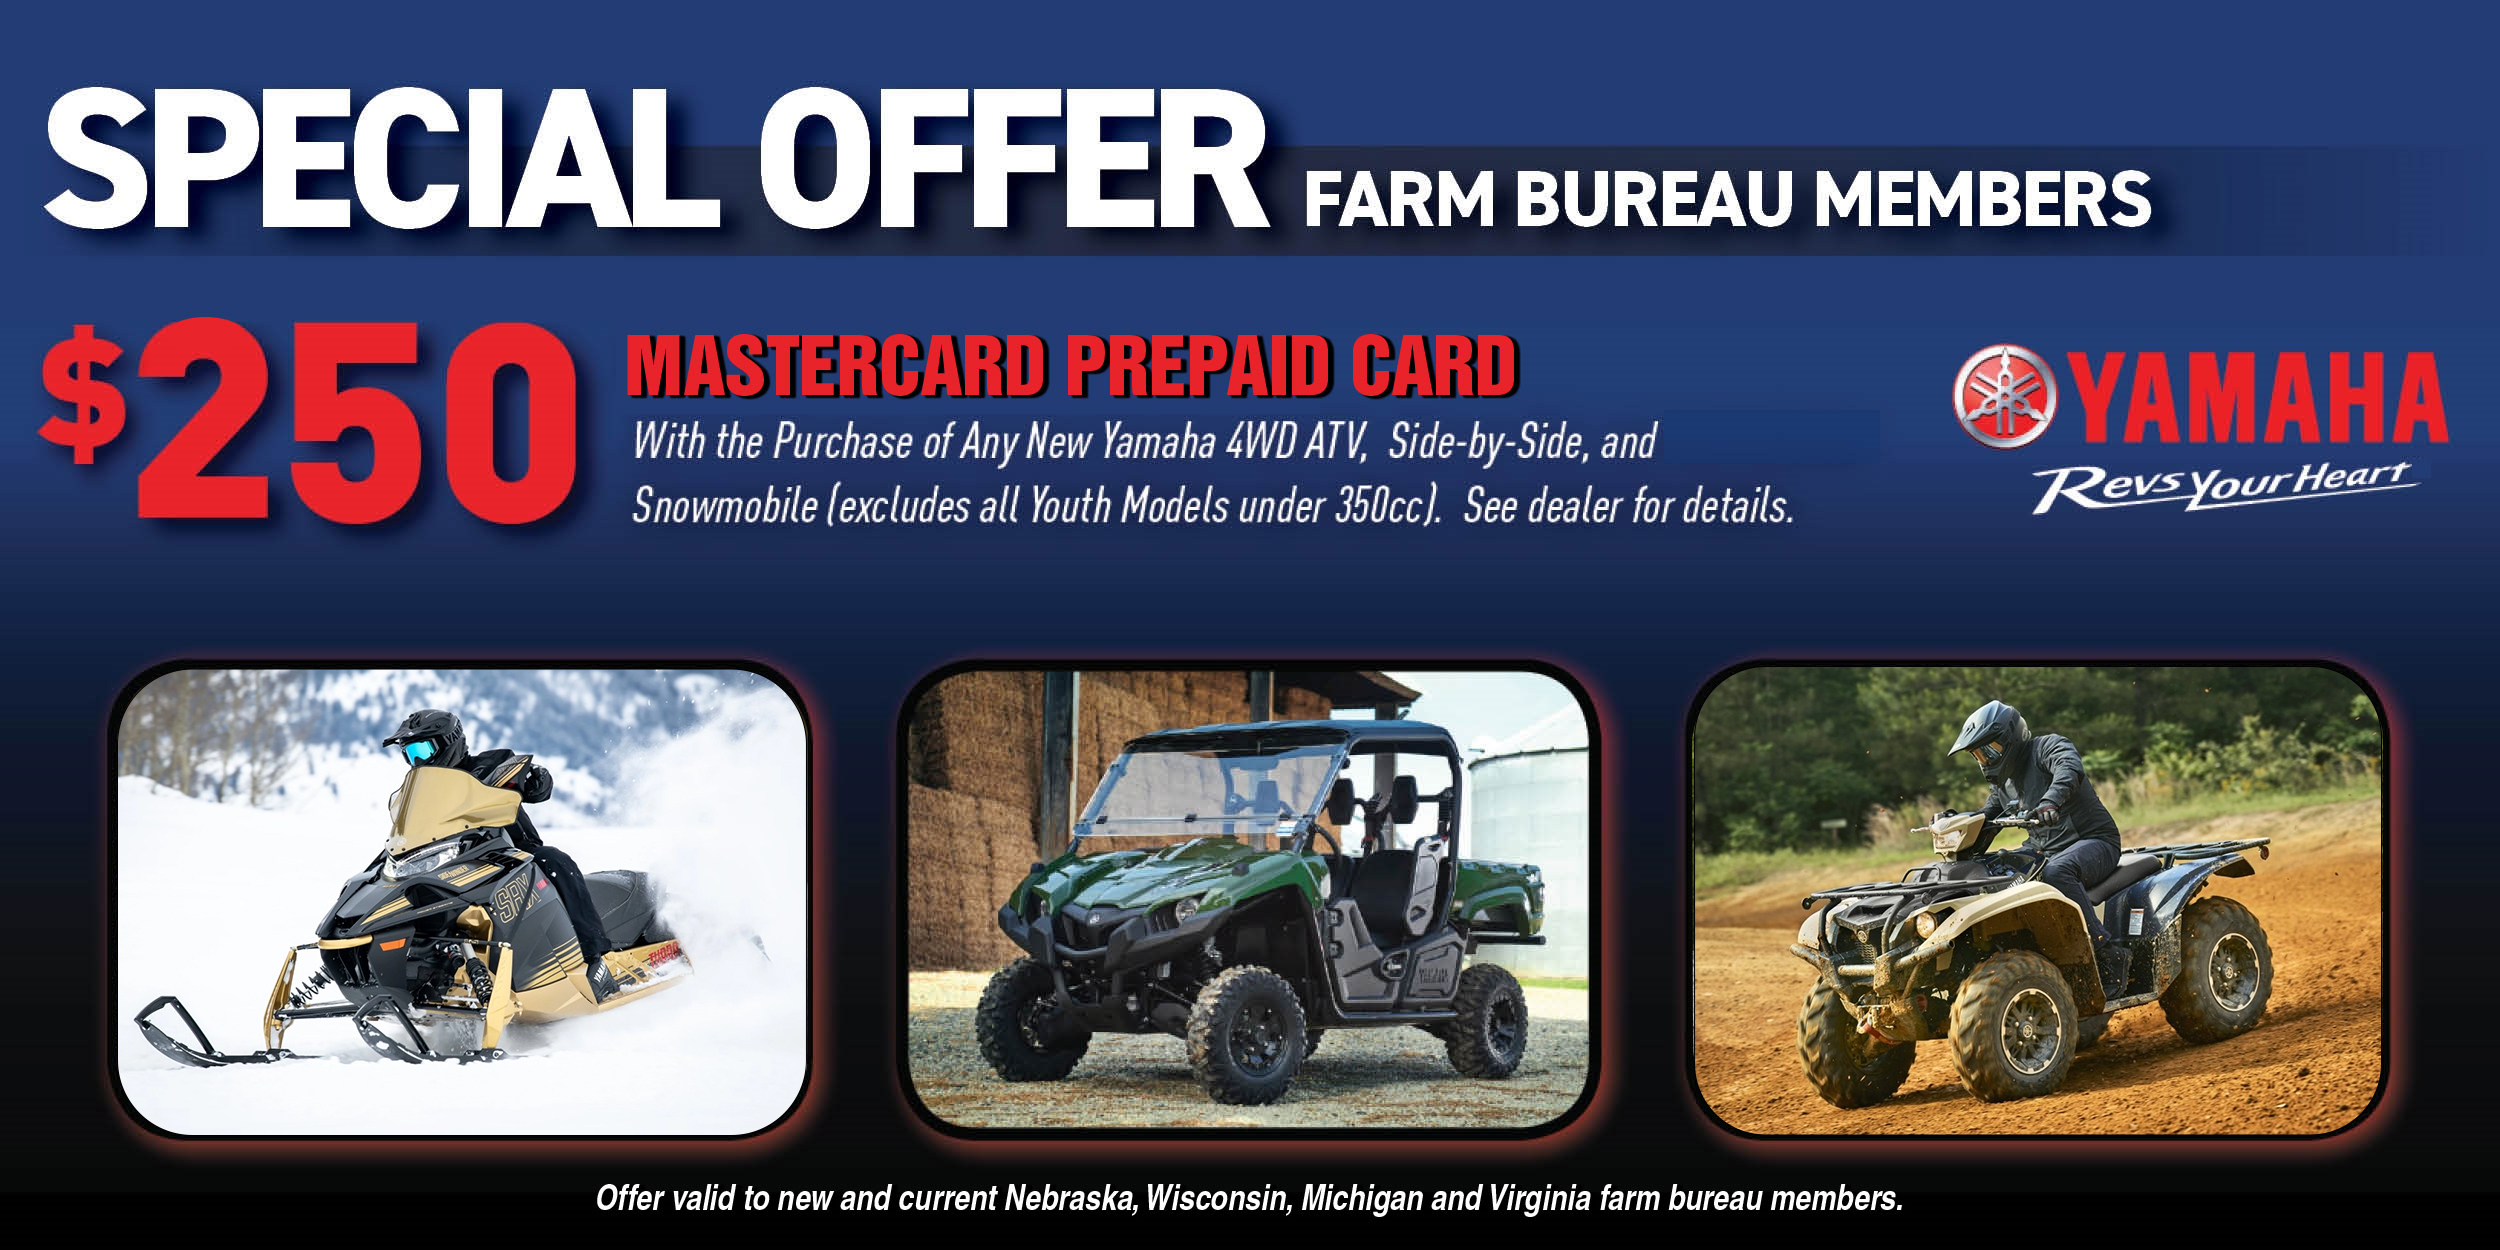 Special Offer for Farm Bureau Members. $250 Mastercard Prepaid Card with the purchase of any new Yamaha 4WD ATV, Side-By-Side and Snowmobile (excludes all Youth Models under 350cc). See dealer for details. Offer valid to new and current Nebraska, Wisconsin, Michigan and Virginia farm bureau members.